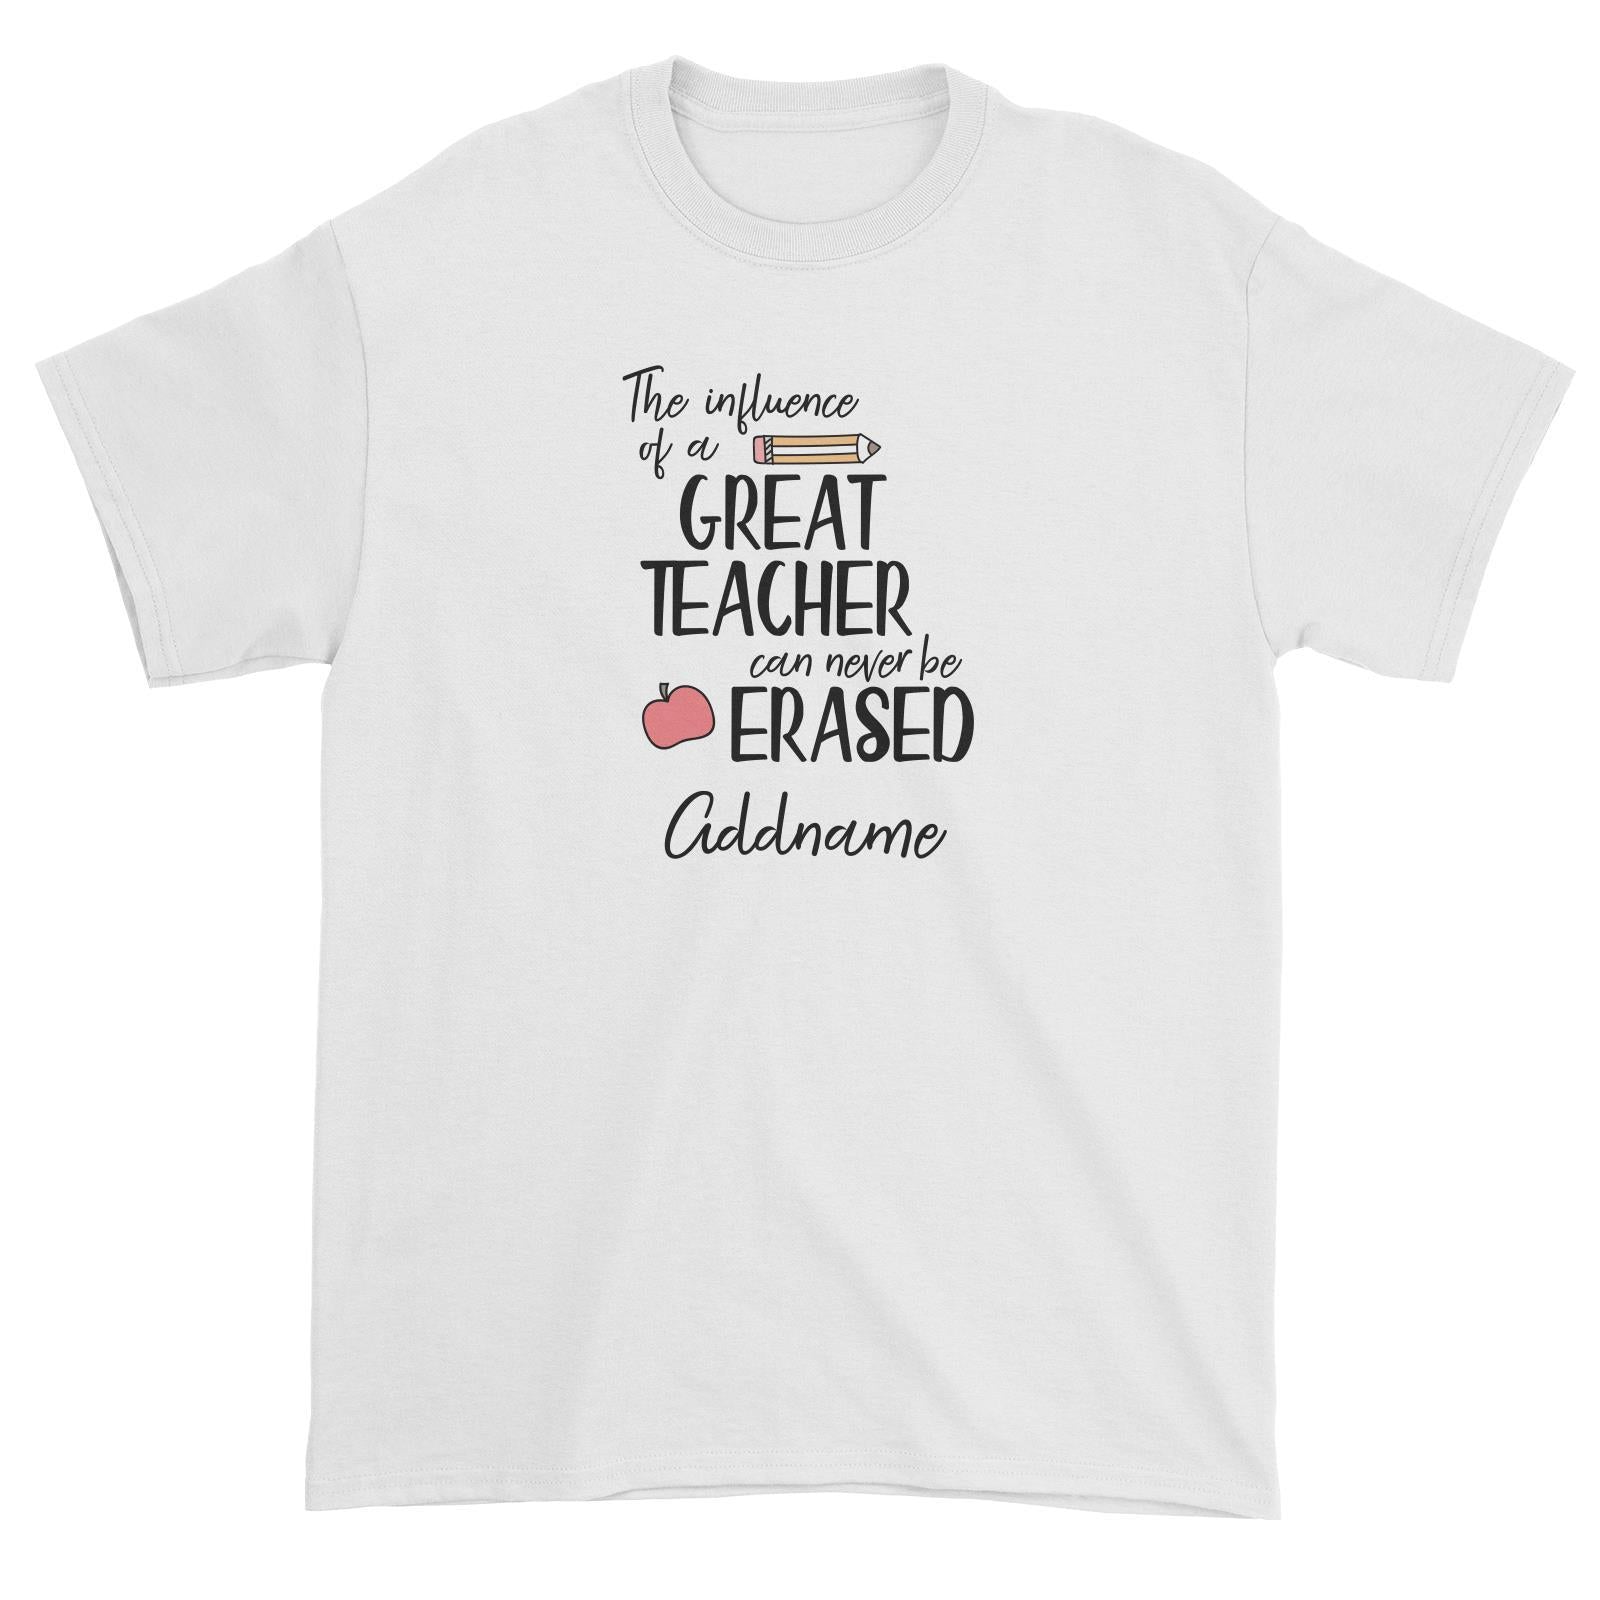 Teacher Quotes The Influence Of A Great Teacher Can Never Be Erased Addname Unisex T-Shirt